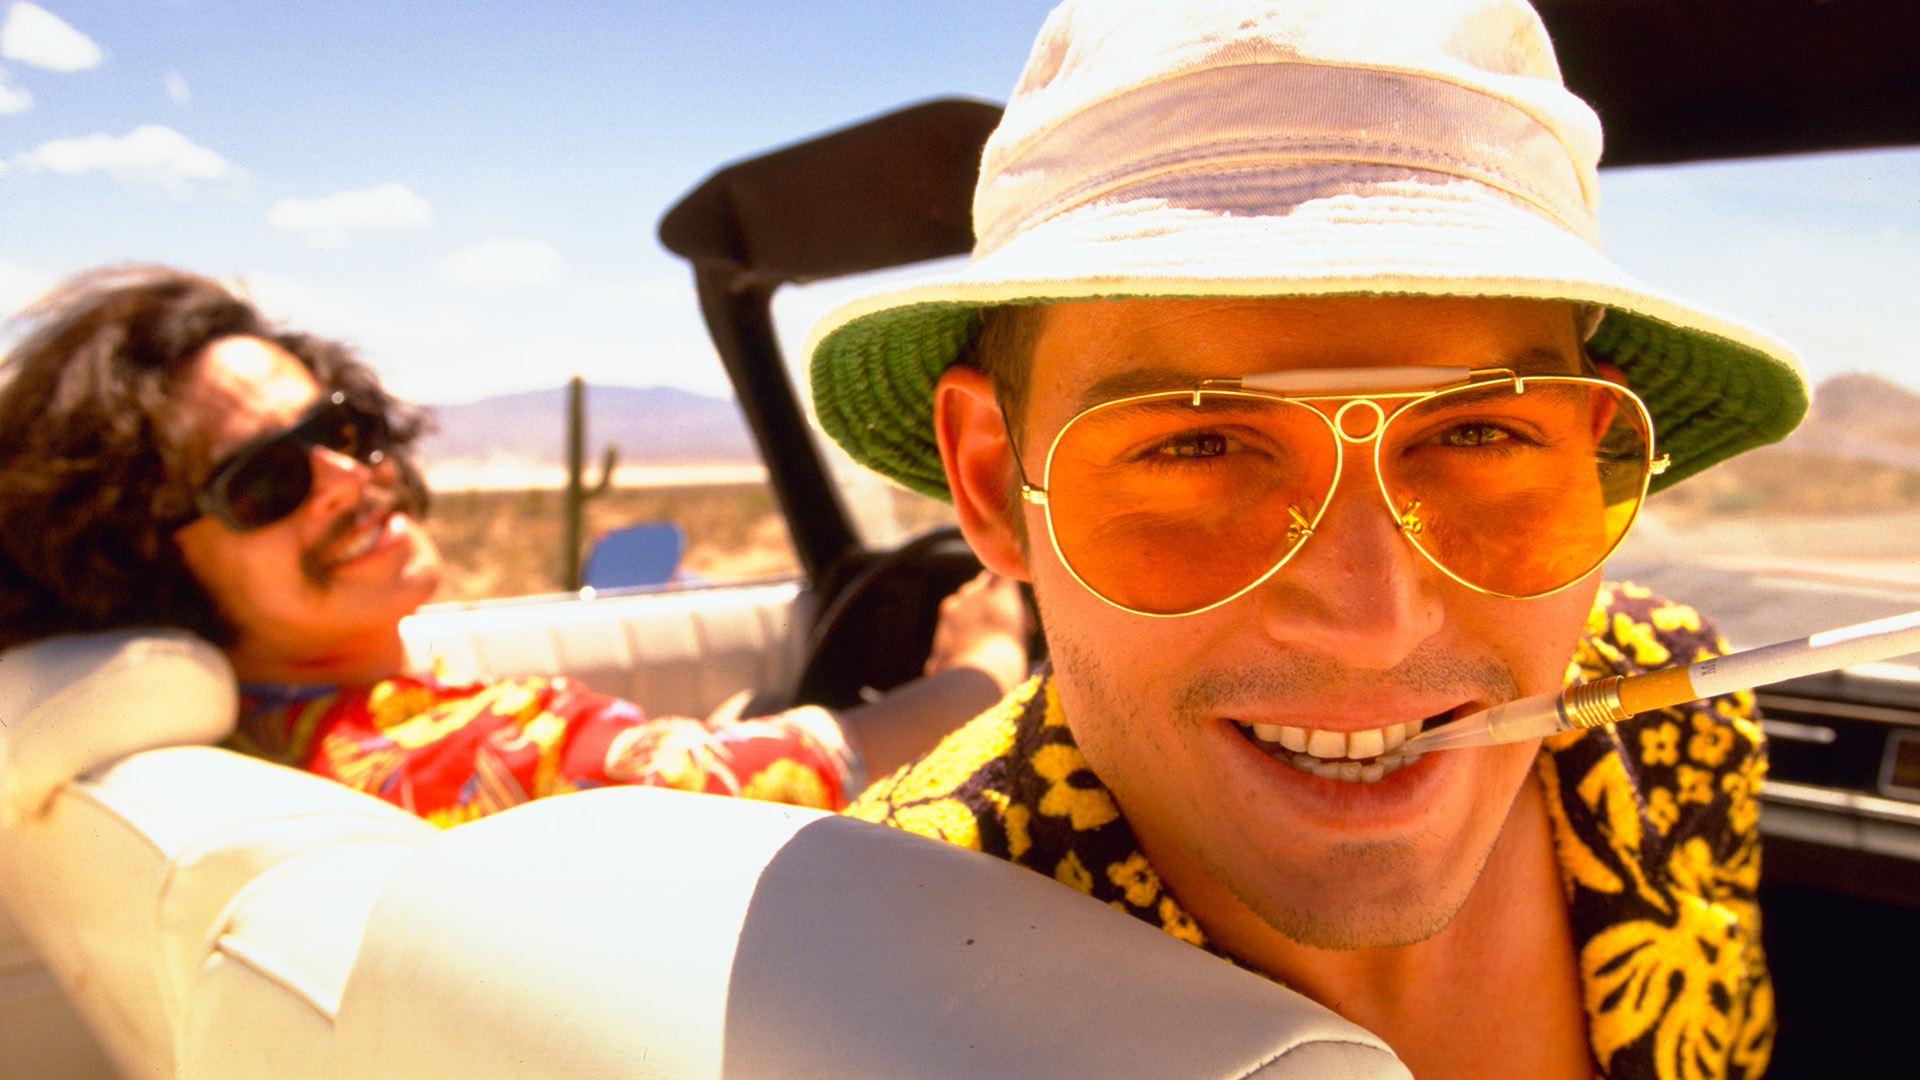 ray ban fear and loathing in las vegas